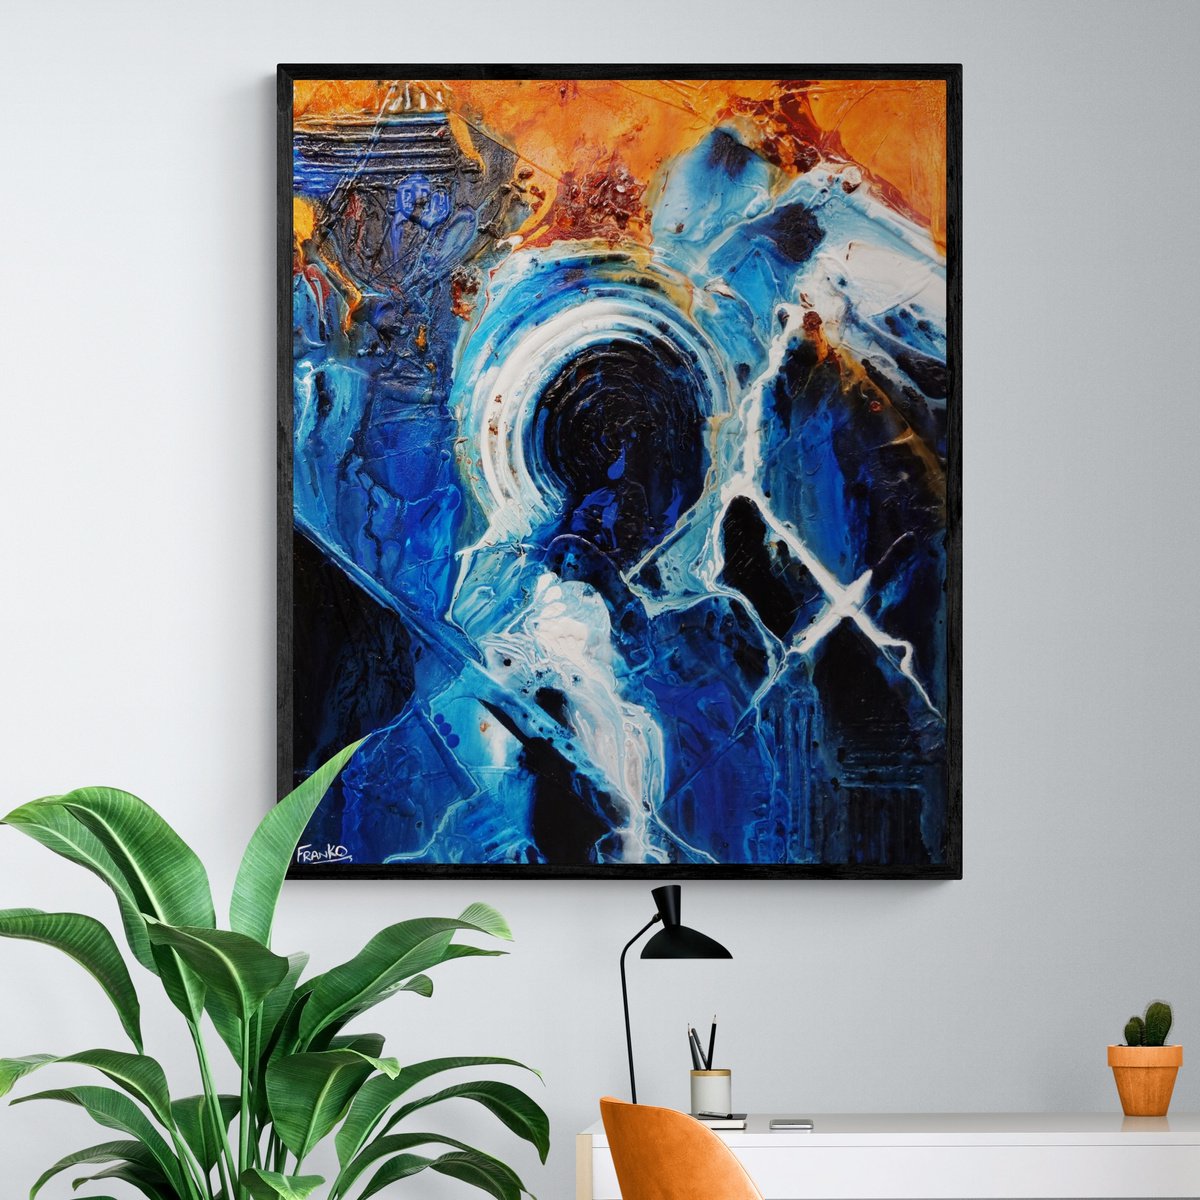 Leather and Sapphires 120cm x 100cm Blue Orange Textured Abstract Art by Franko